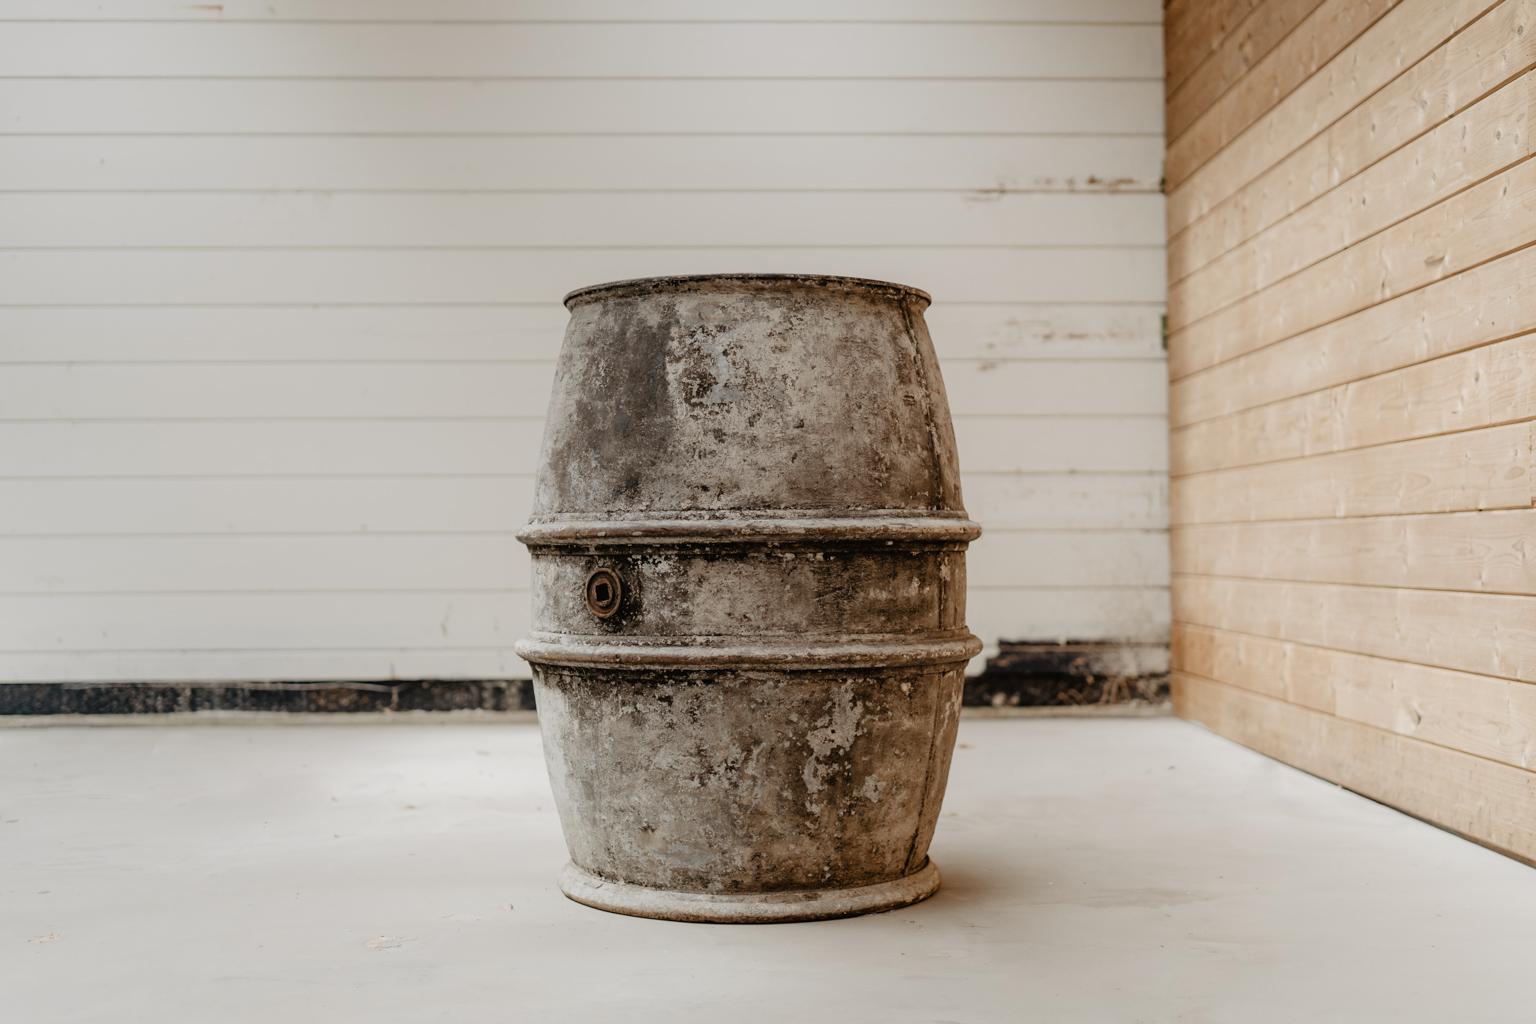 This extra large barrel makes a wonderful planter/jardinière, can be used indoors as well as outdoors.